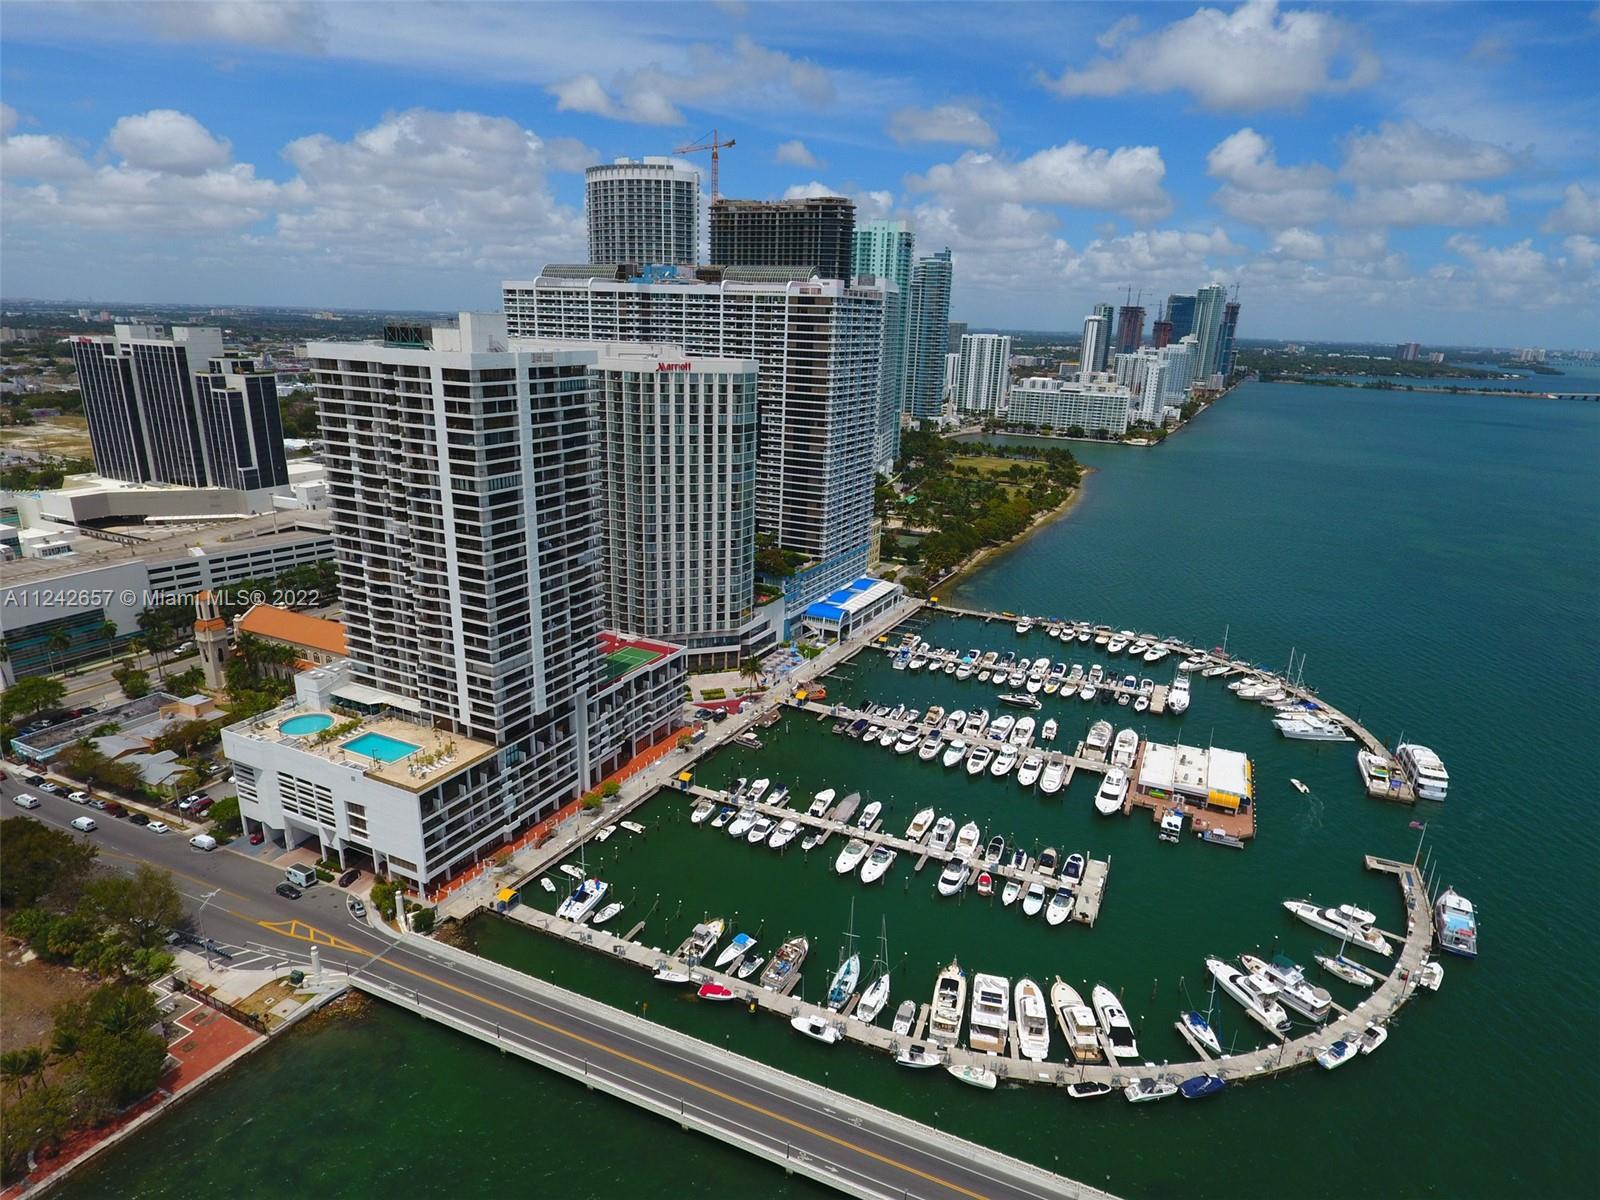 Highly Desirable Condo w/ Amazing Biscayne Bay and City Views. 1 Bedroom, 1.5 Baths, Living Room & D